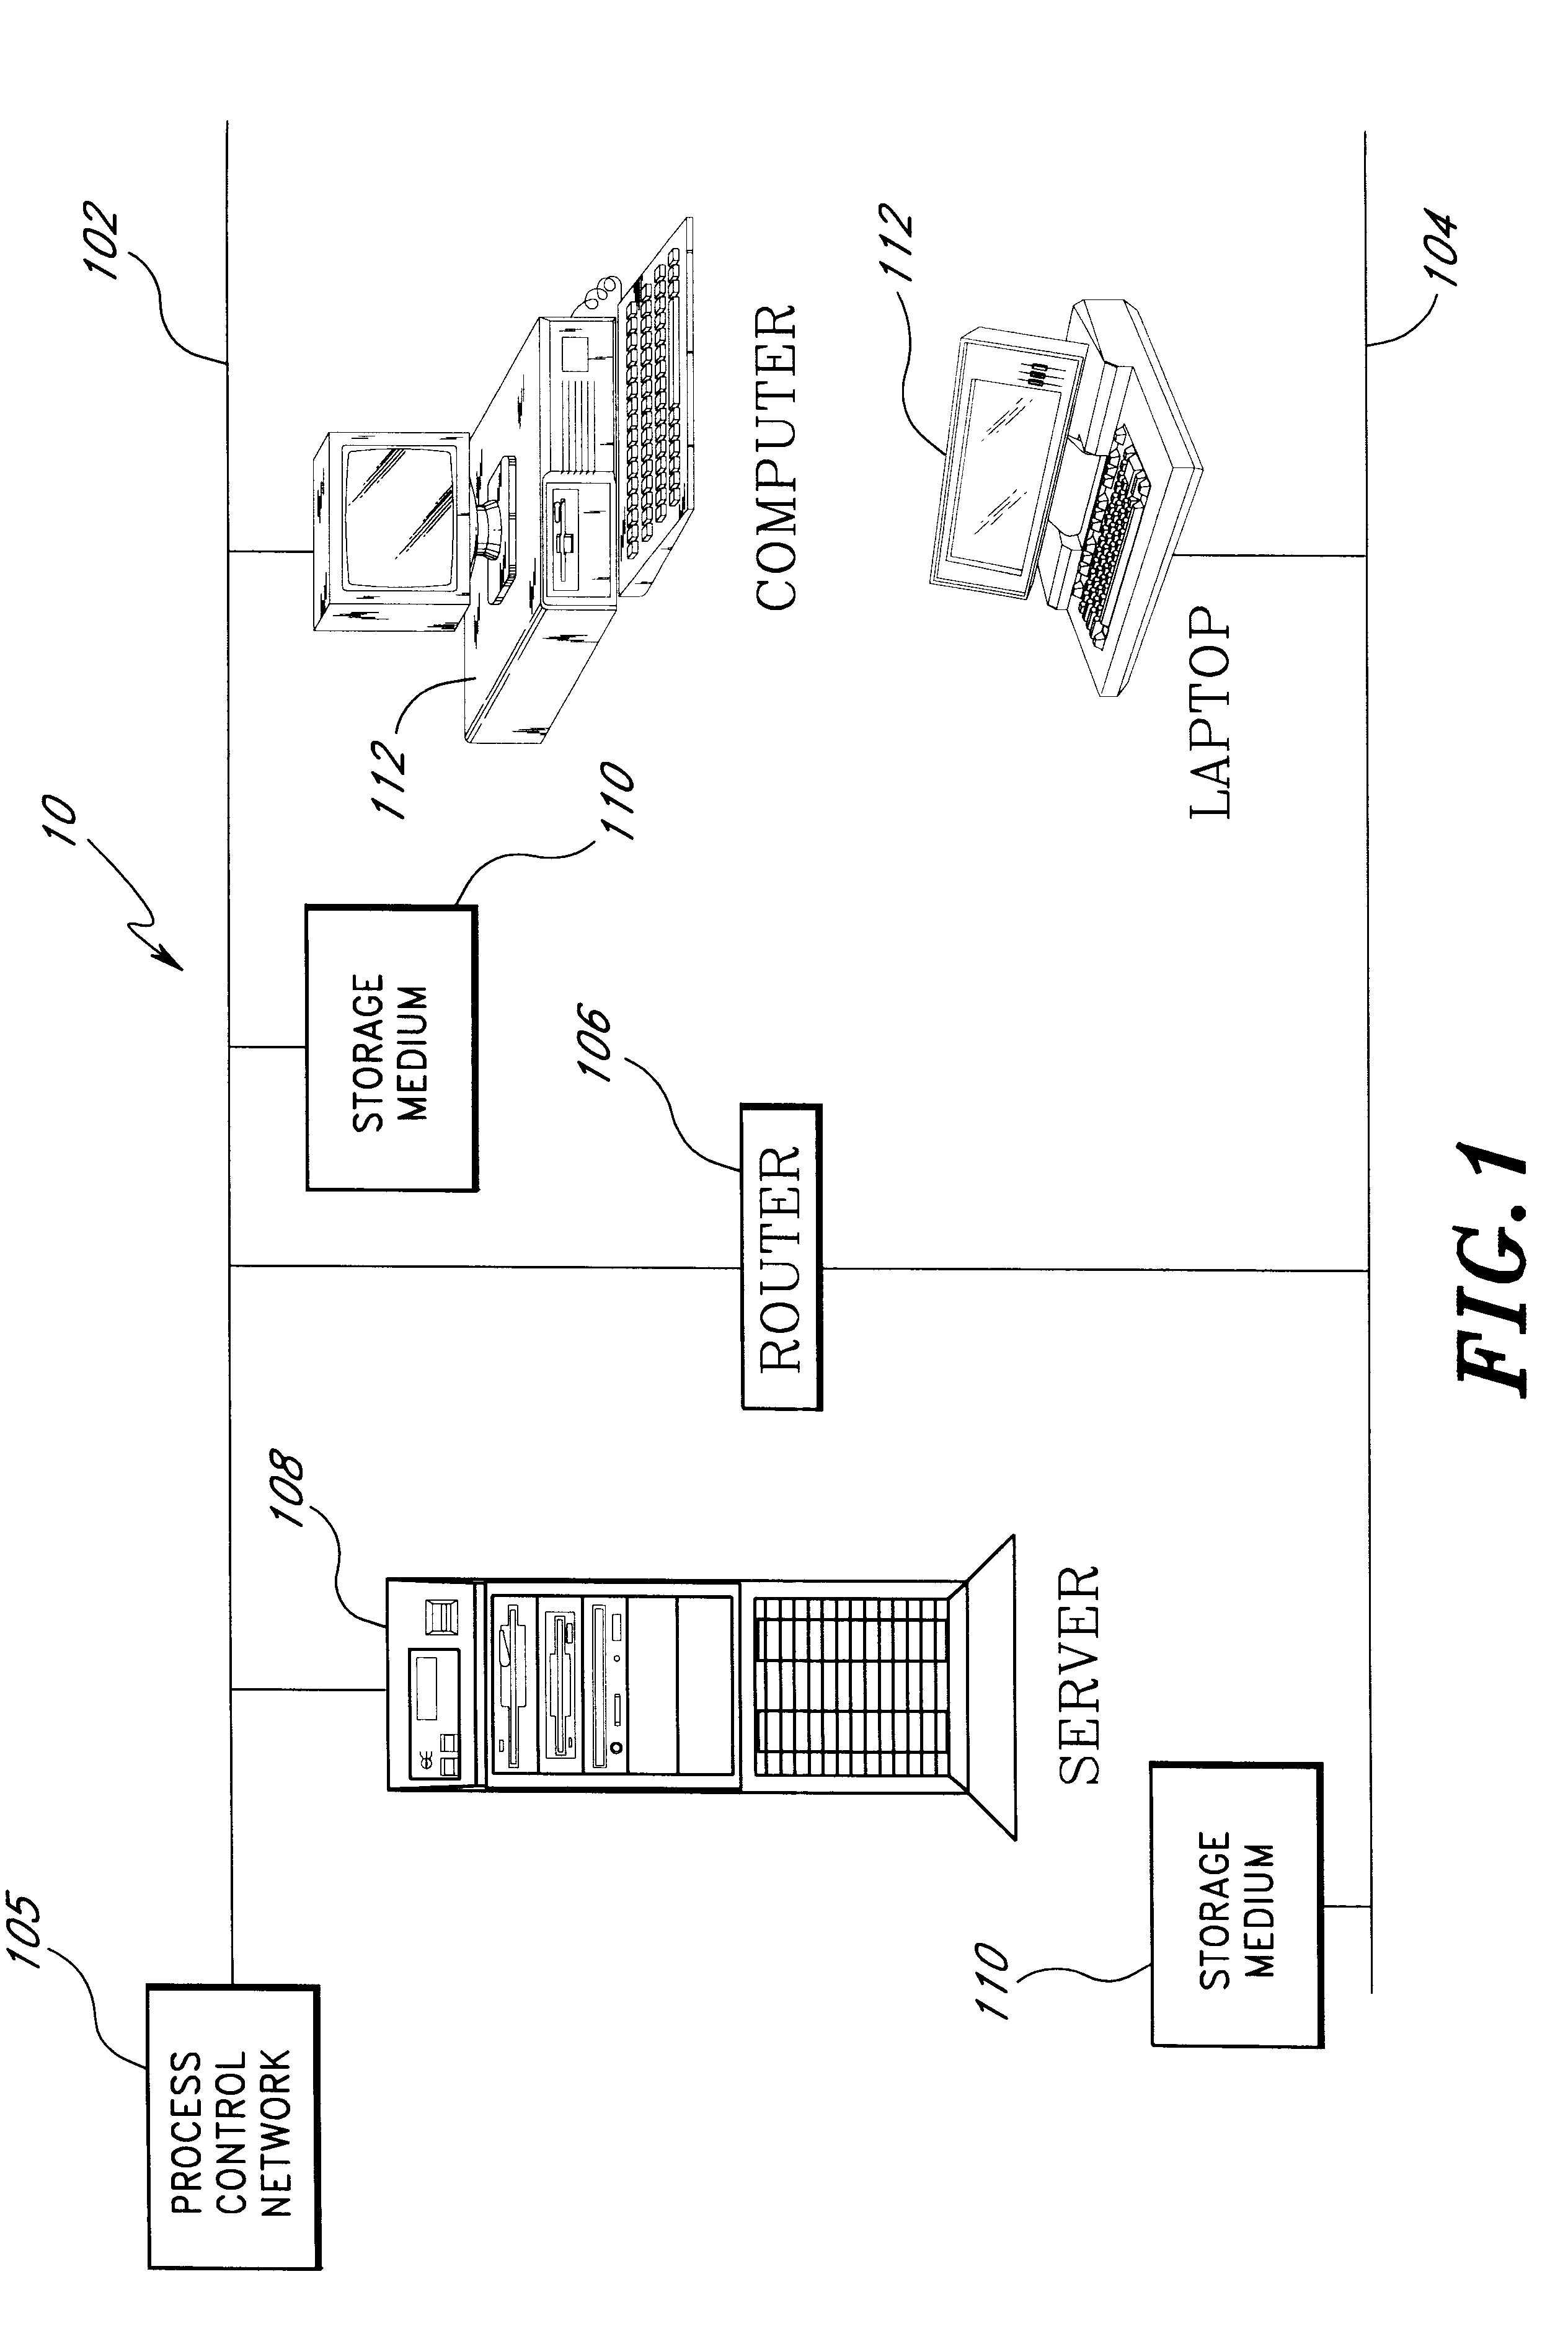 Method and systems for a graphical real time flow task scheduler